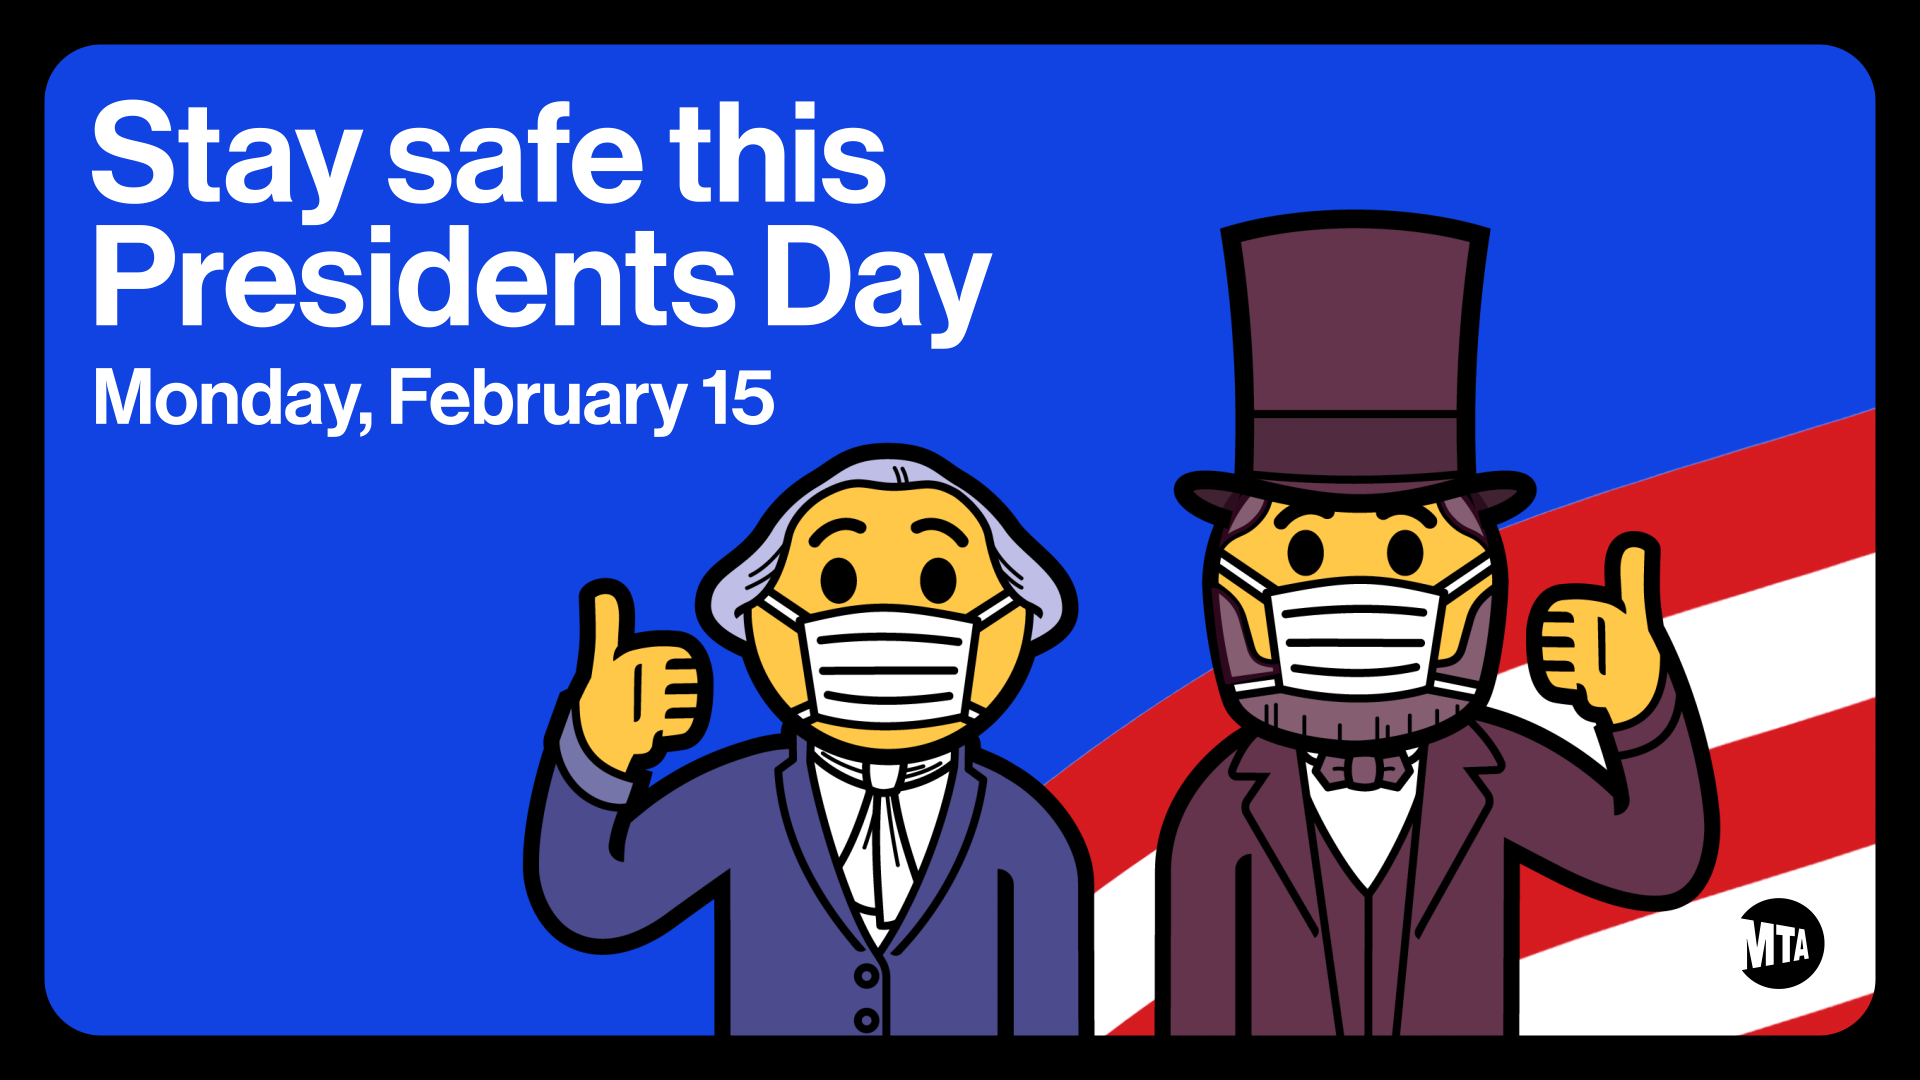 MTA Announces Service Plans for Presidents’ Day